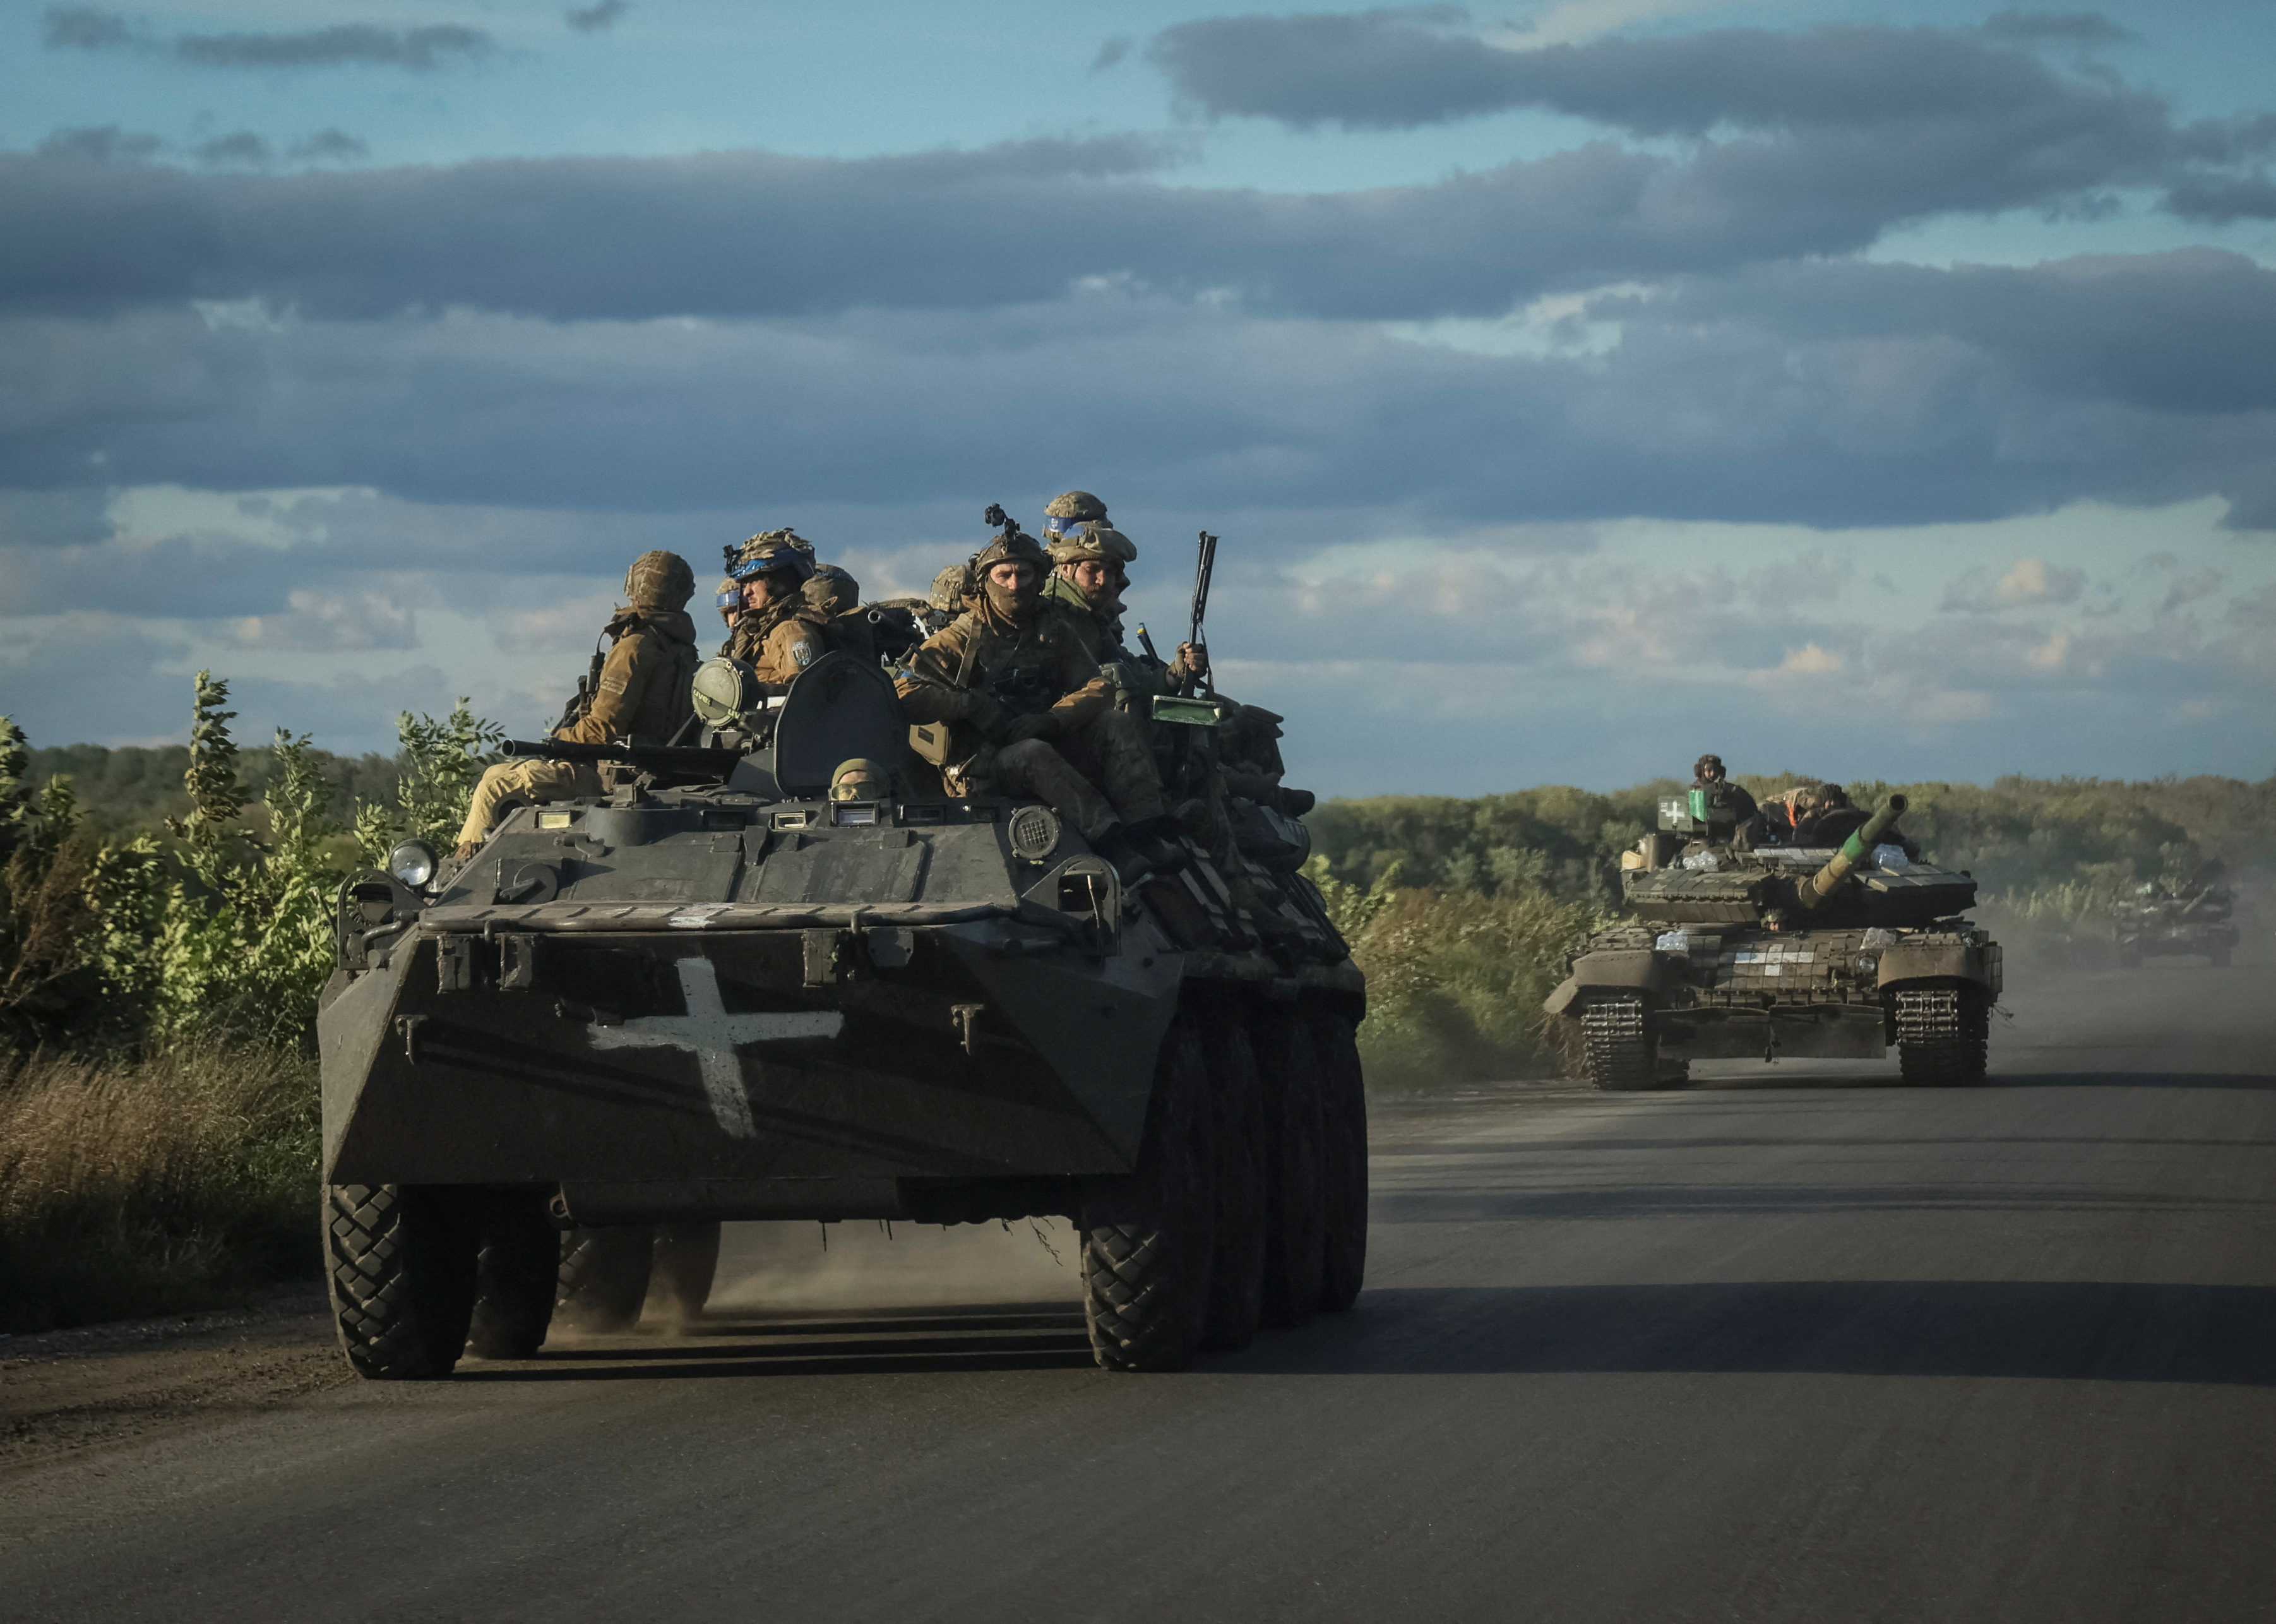 Ukrainian servicemen ride on Armoured Personnel Carrier (APC) and a tank in the town of Izium